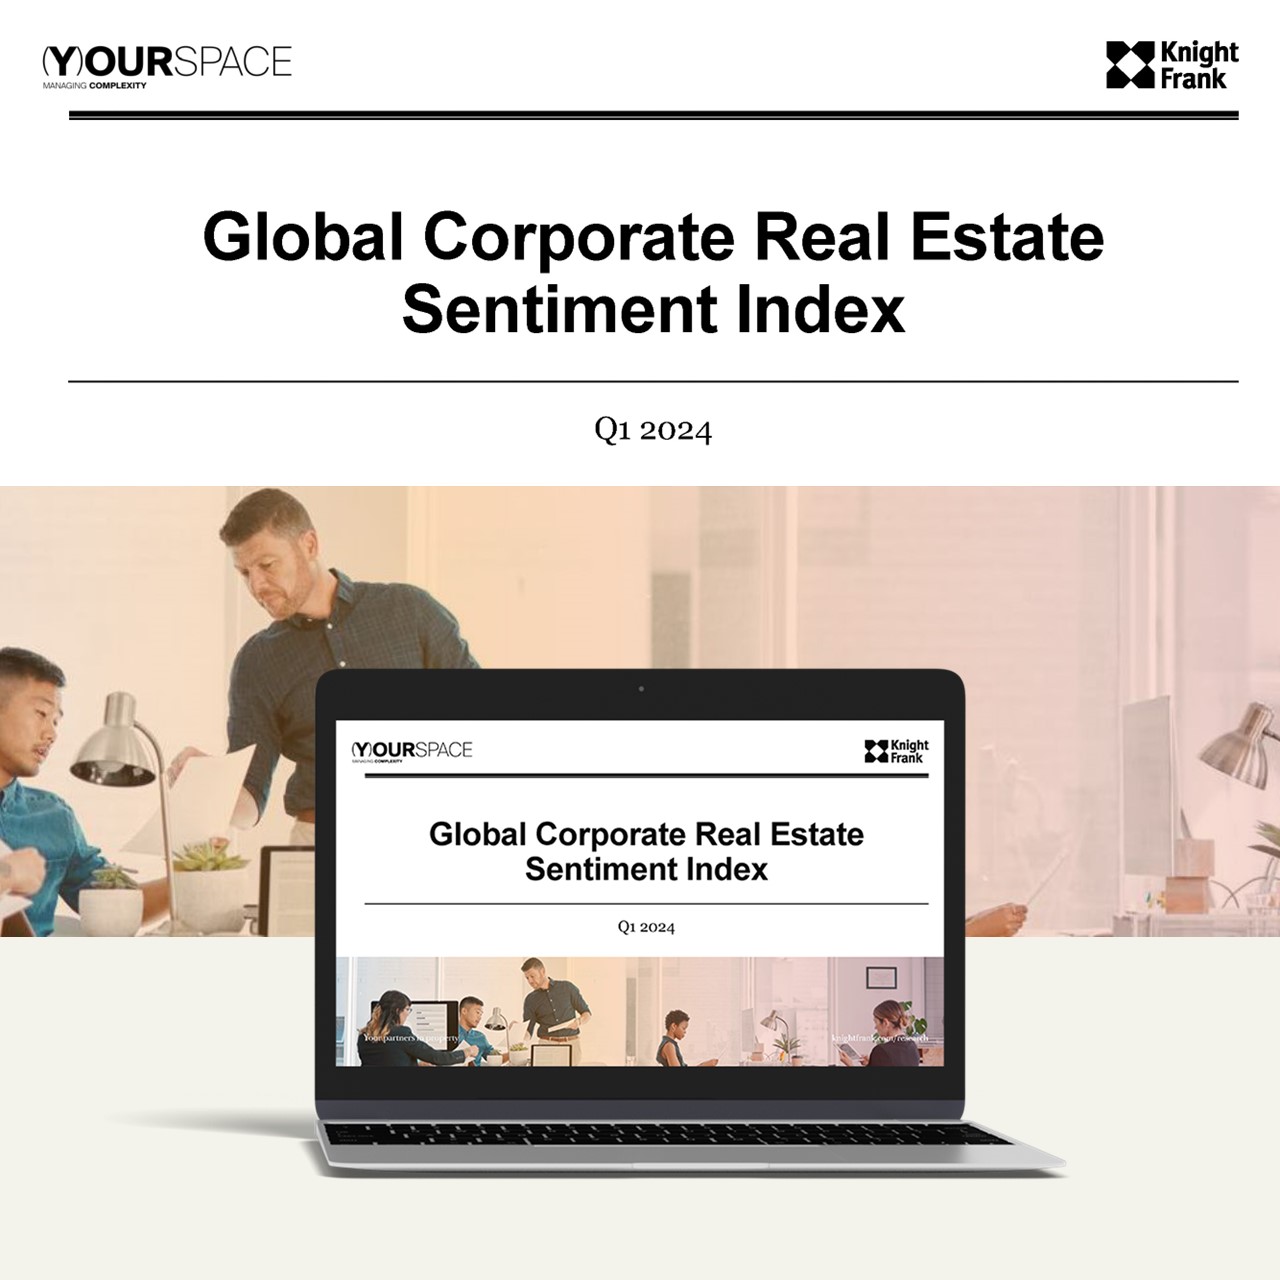 The Knight Frank Global Corporate Real Estate Sentiment Index Q1 2024